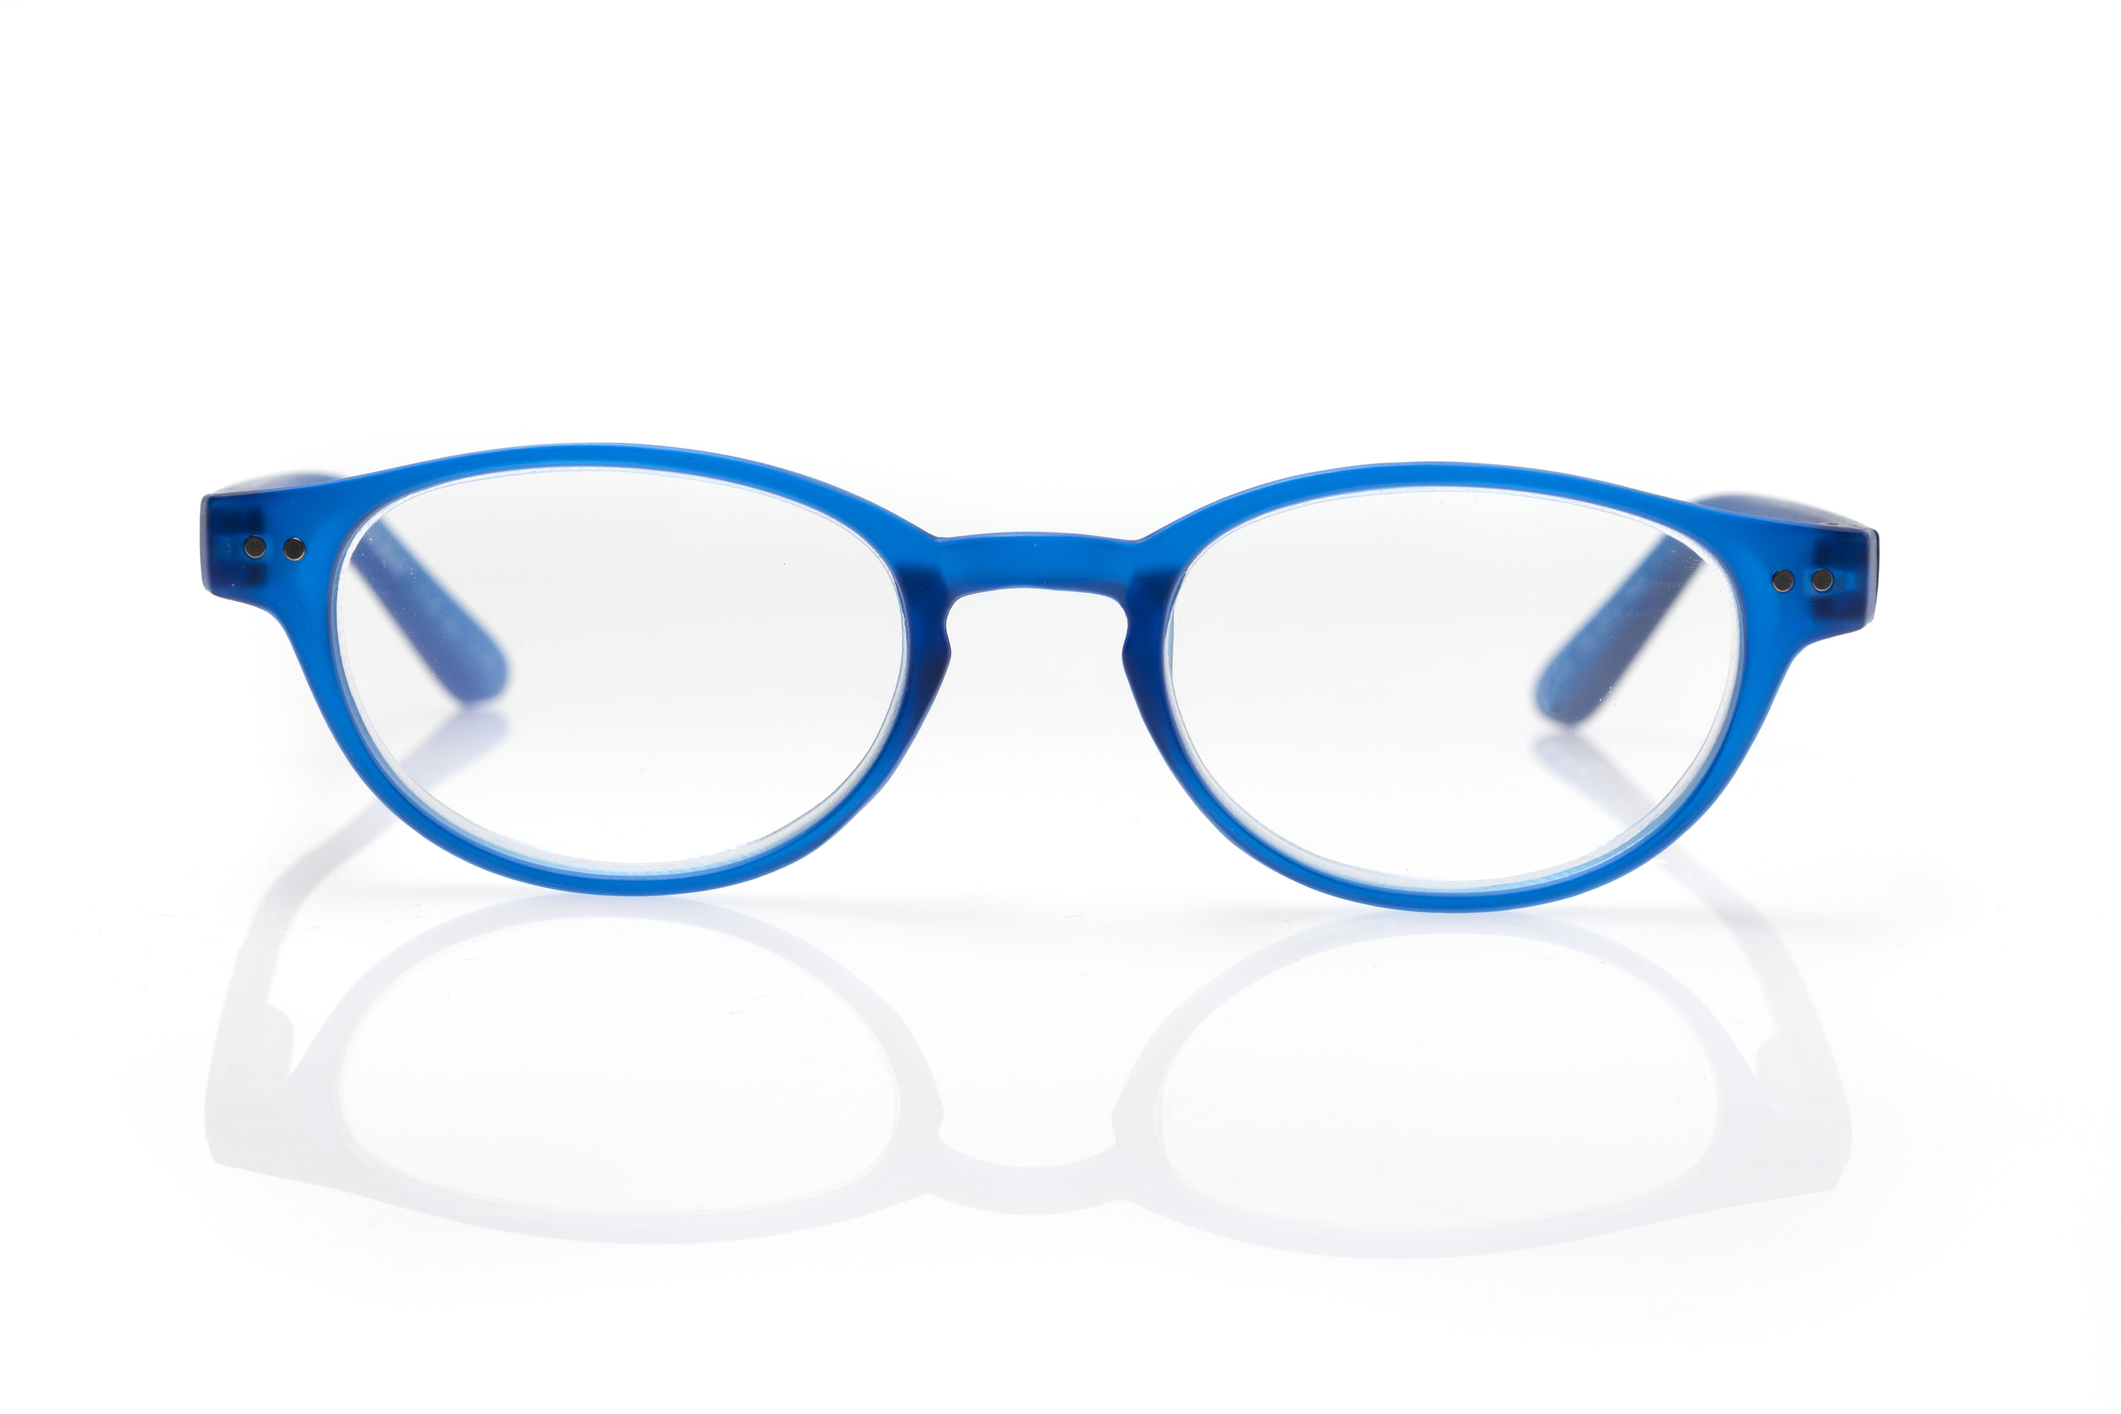 a pair of blue glasses